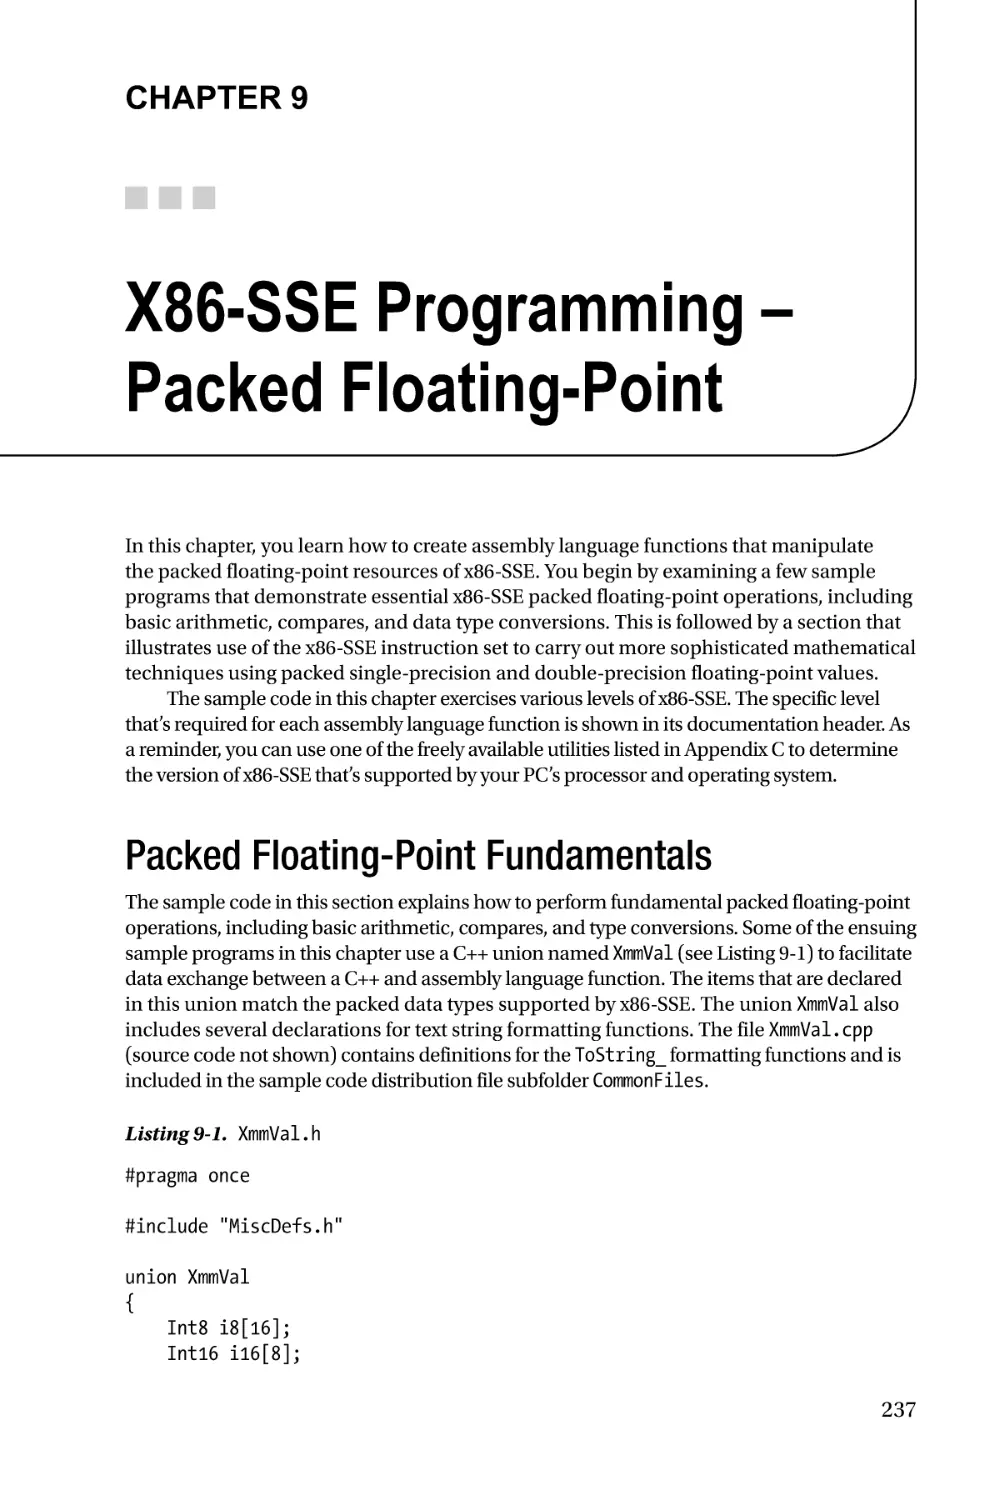 Chapter 9
Packed Floating-Point Fundamentals